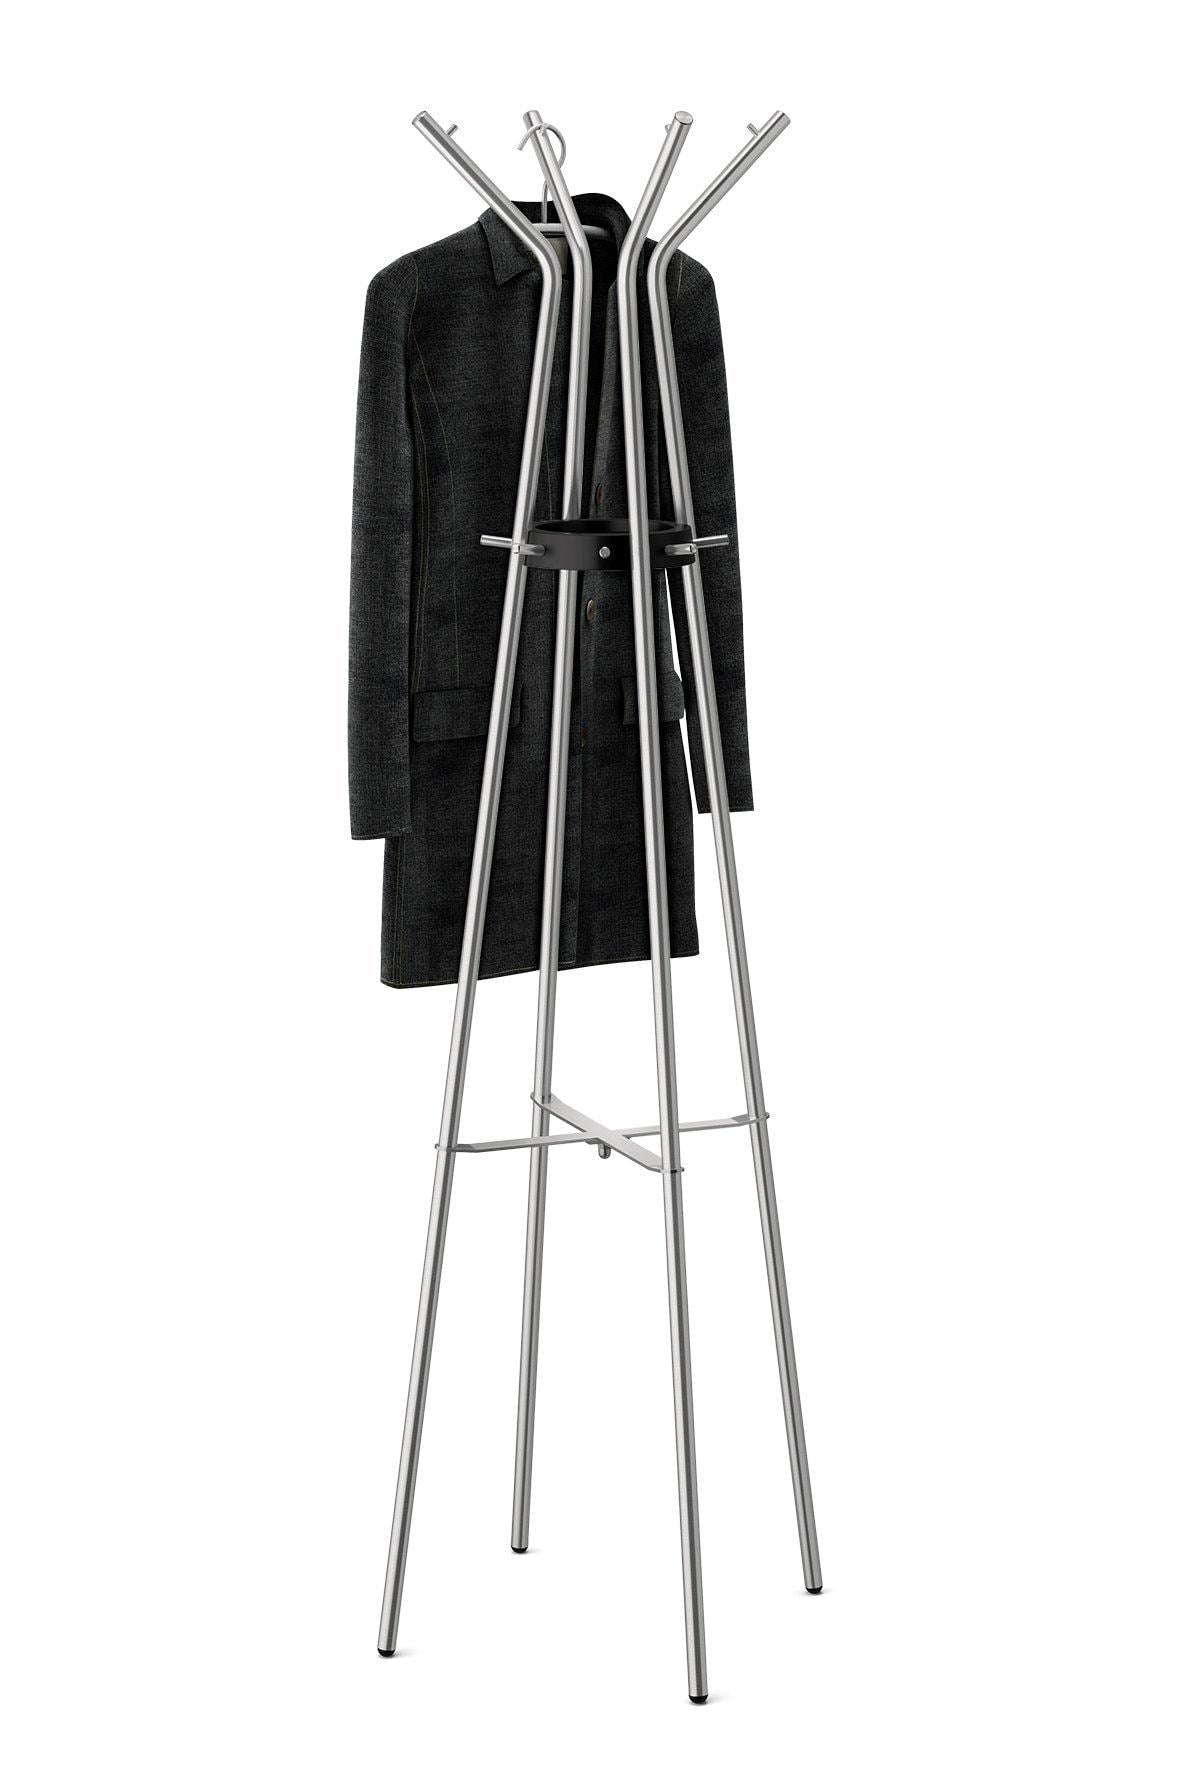 Buy now zack stainless steel teros matt finished coat stand 21 26 x 68 90 silver metallic